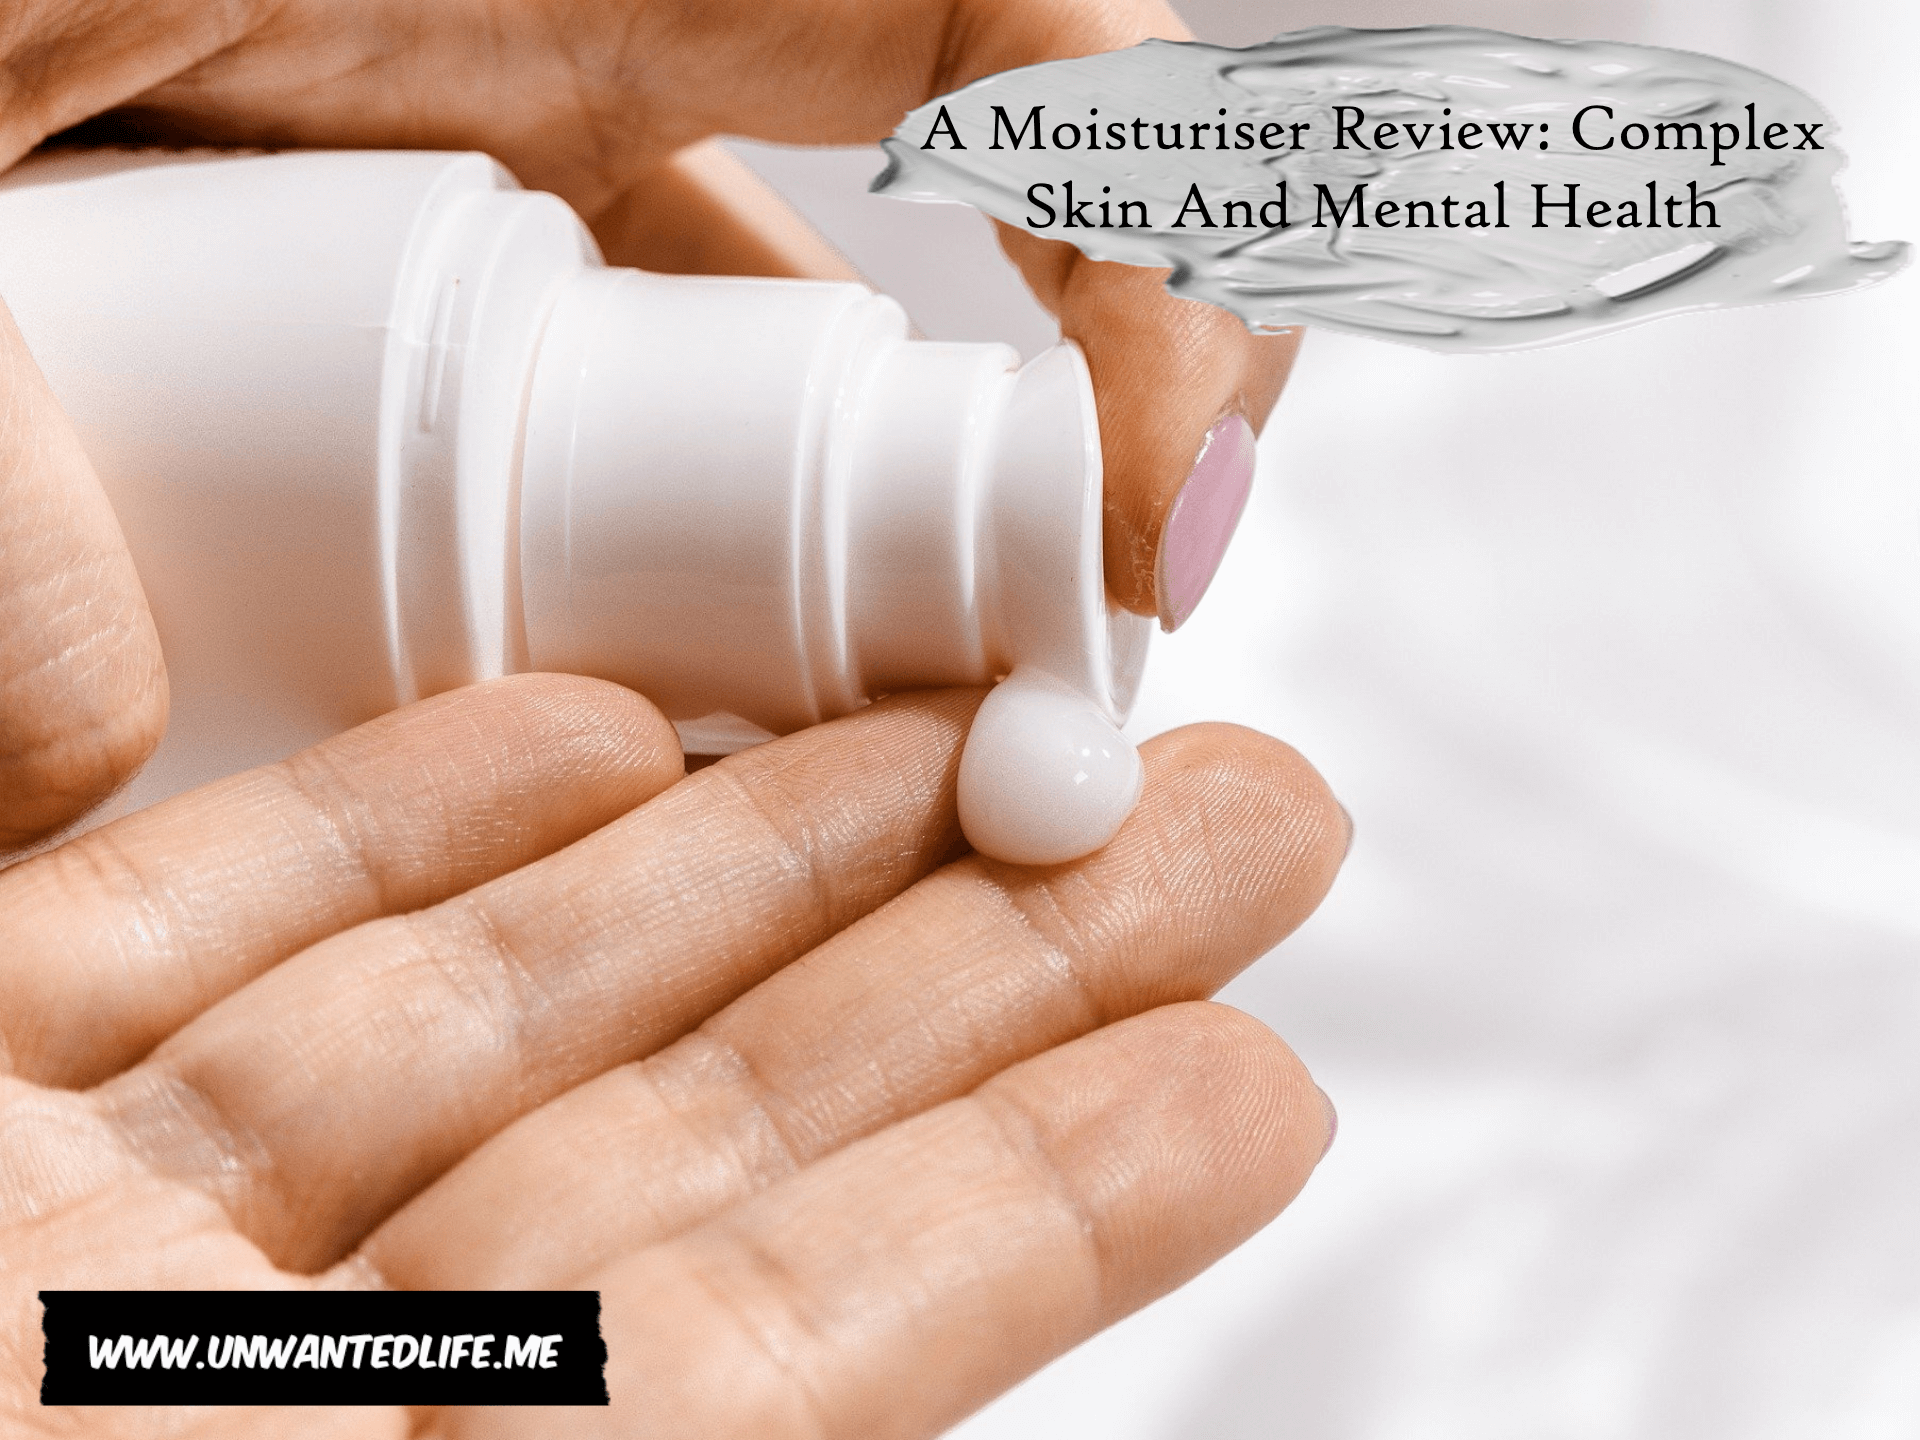 A photo of a white person hand squeezing moisturising cream into their hands from a bottle, with the article title - A Moisturiser Review Complex Skin And Mental Health - in the top right corner